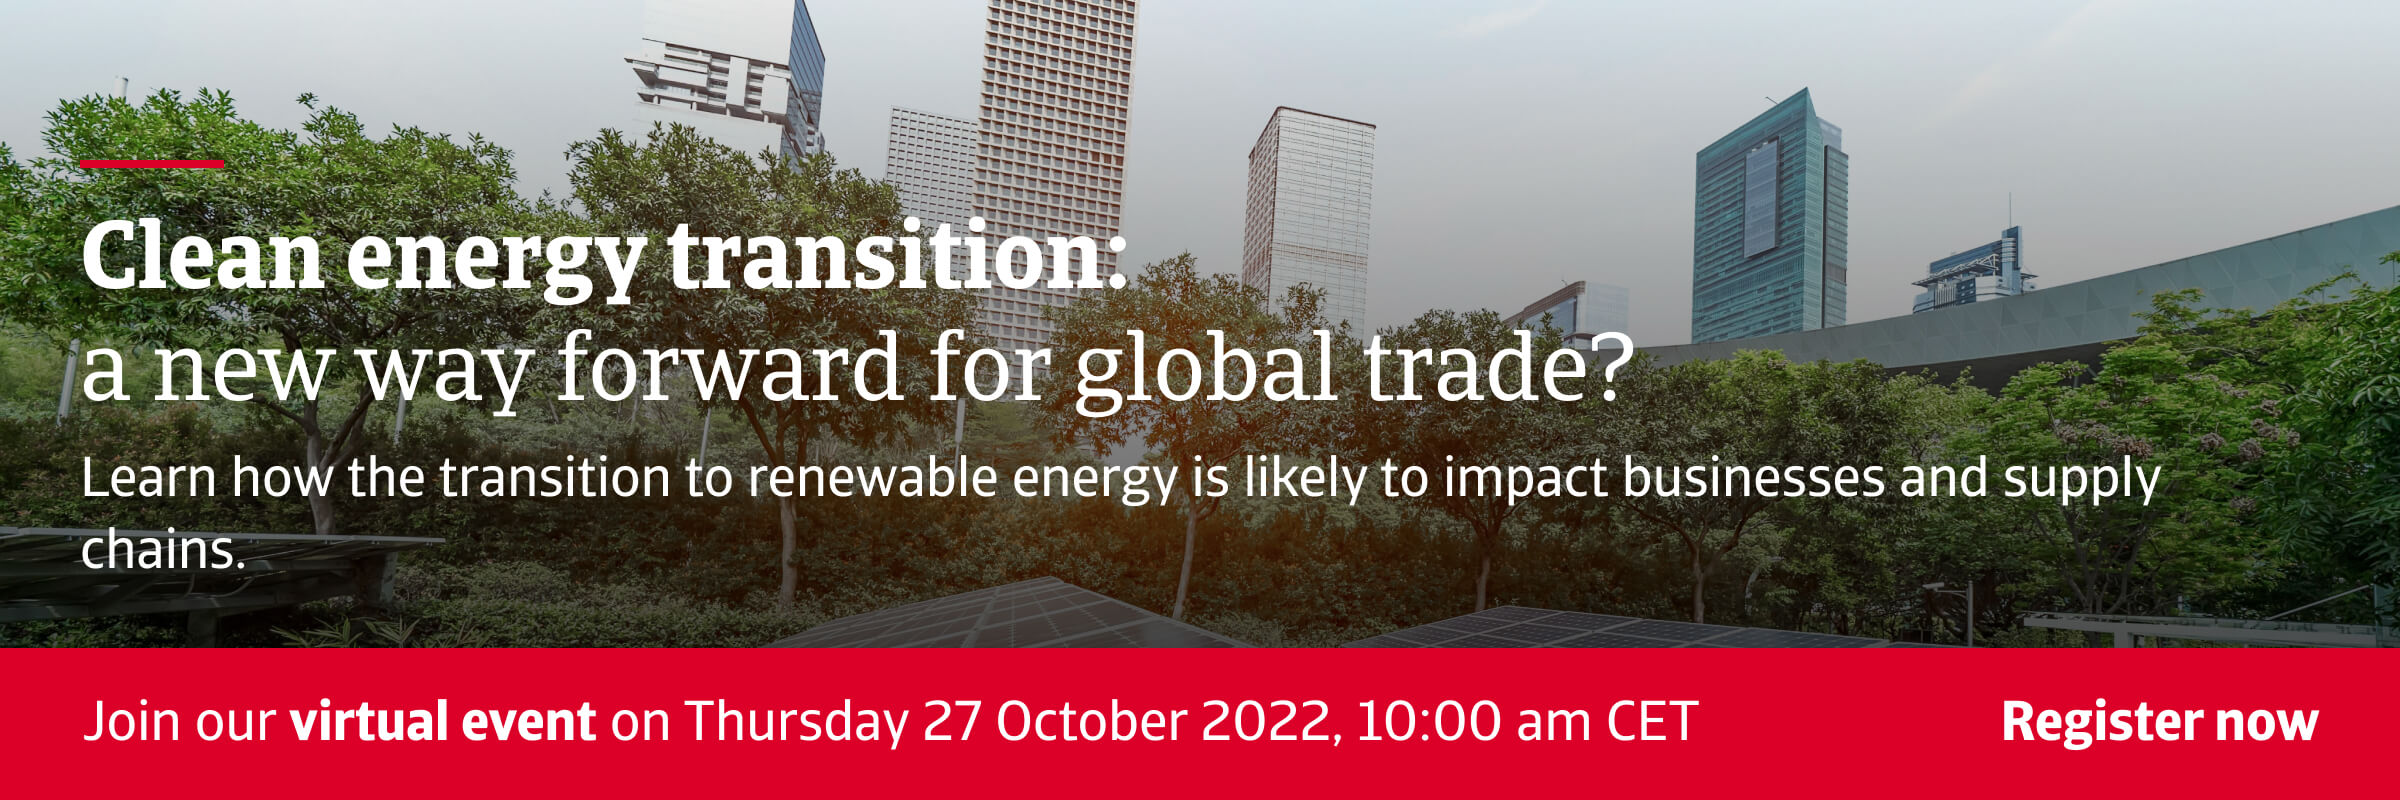 Clean energy transition: a new way forward for global trade? - Webinar